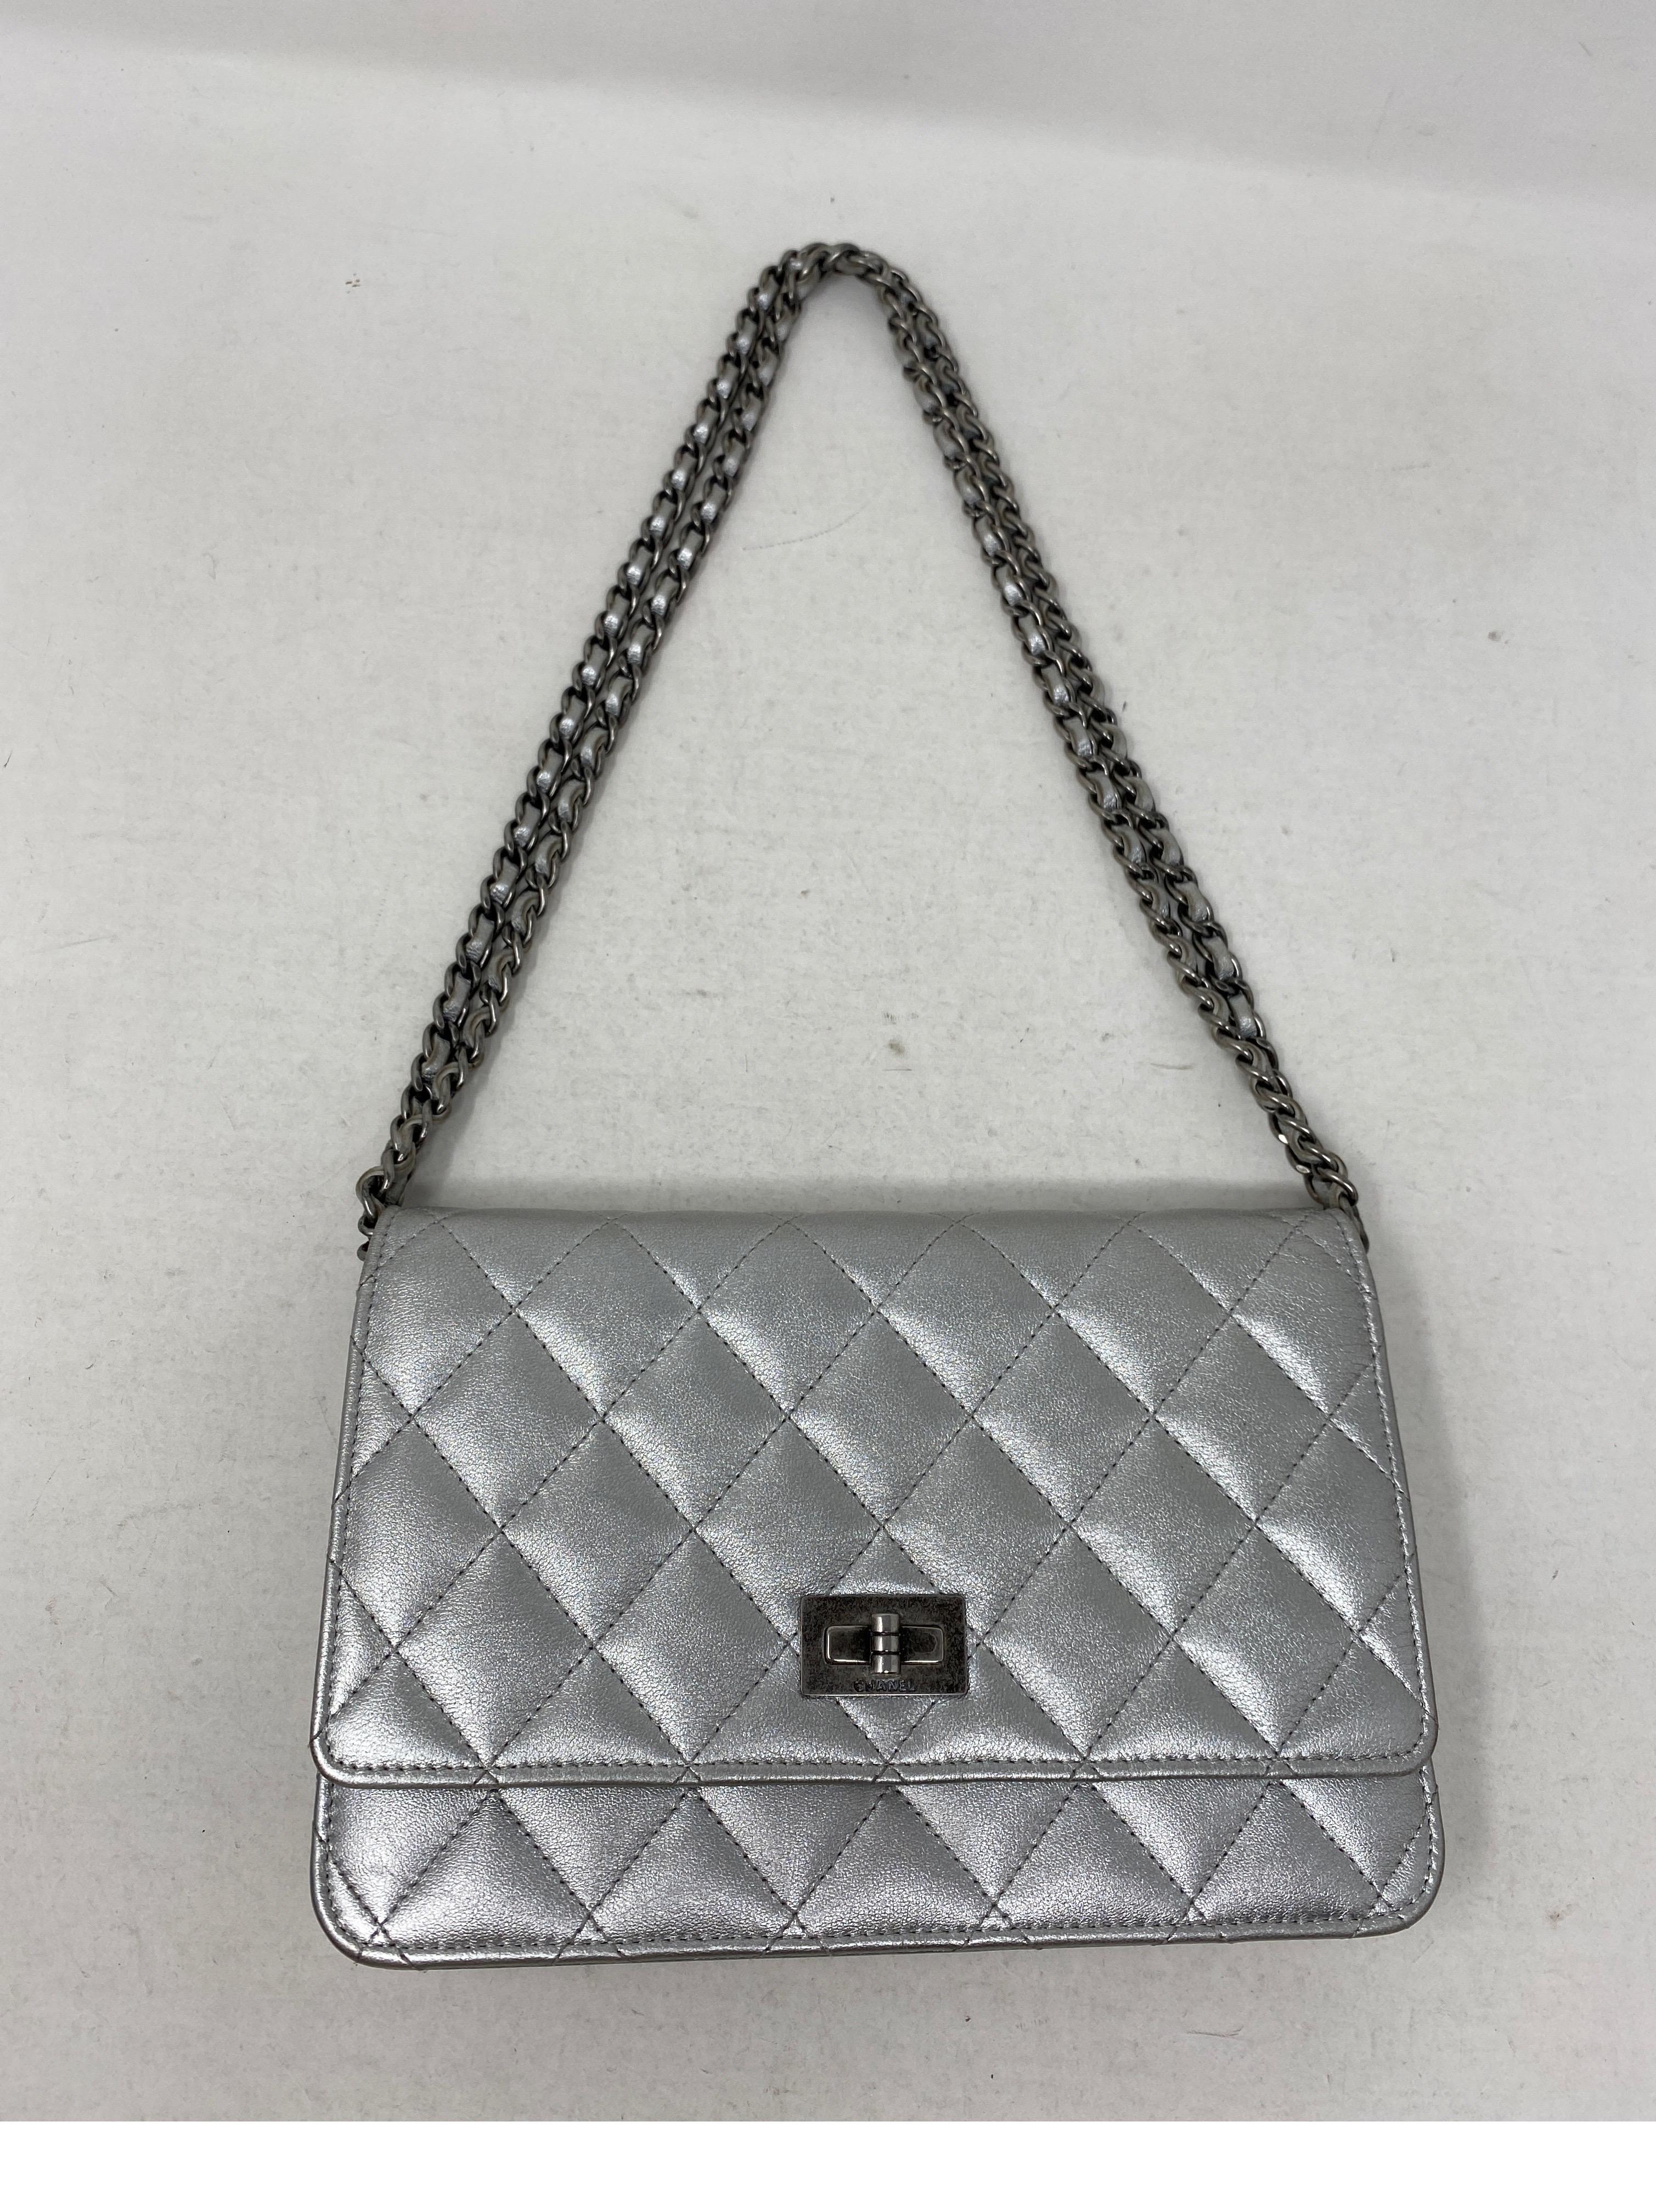 Chanel Silver Reissue Wallet On A Chain Bag 7